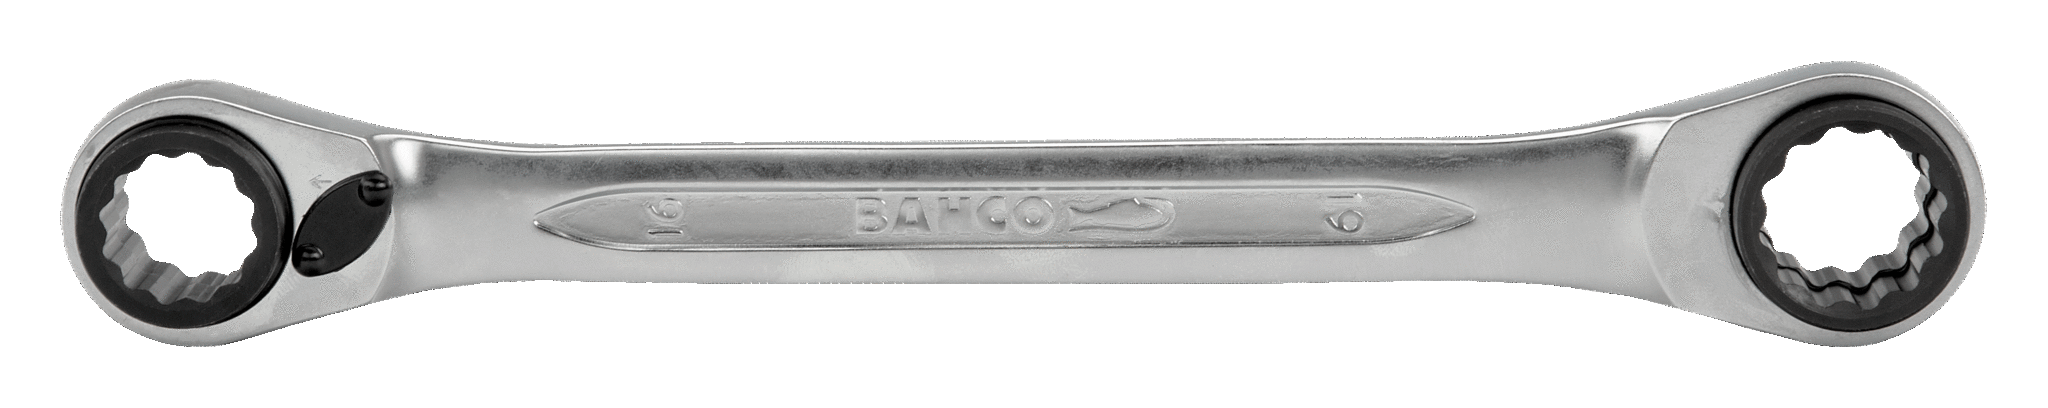 4-in-1 Ratcheting Ring Wrenches with Chrome Finish - S4RM-12-15 by Bahco